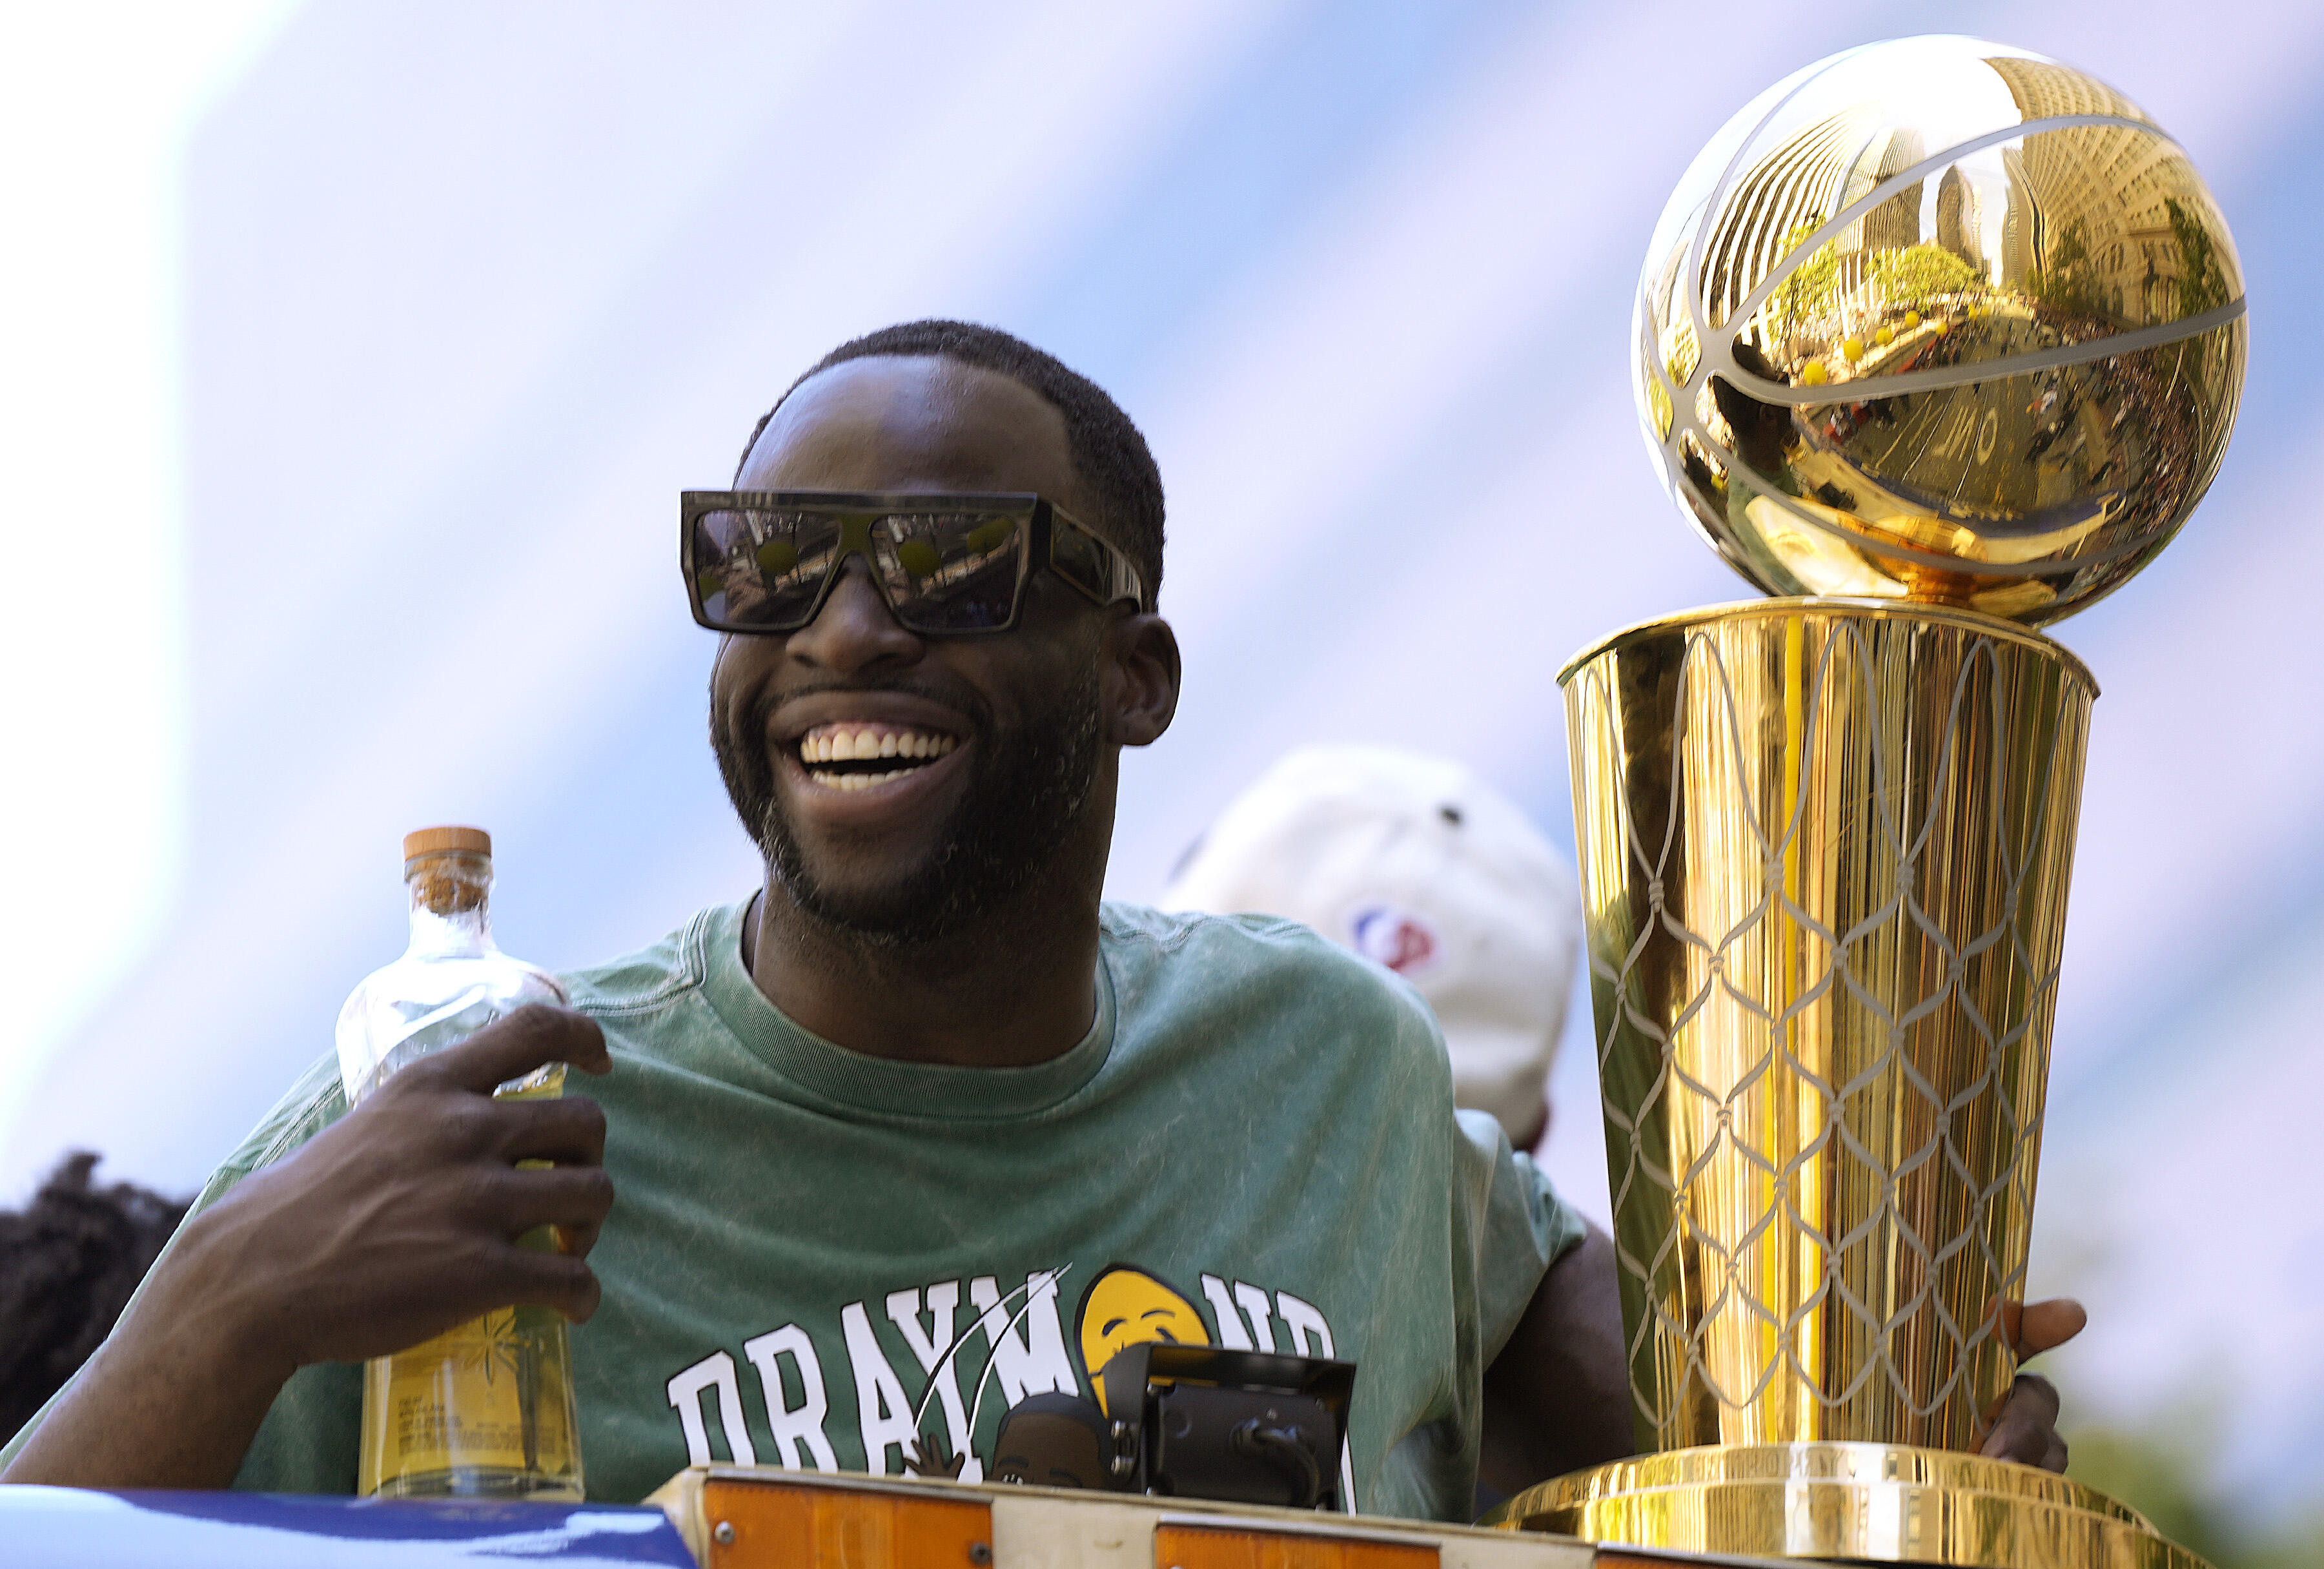 NBA star Draymond Green had a blunt-rolling station at his wedding